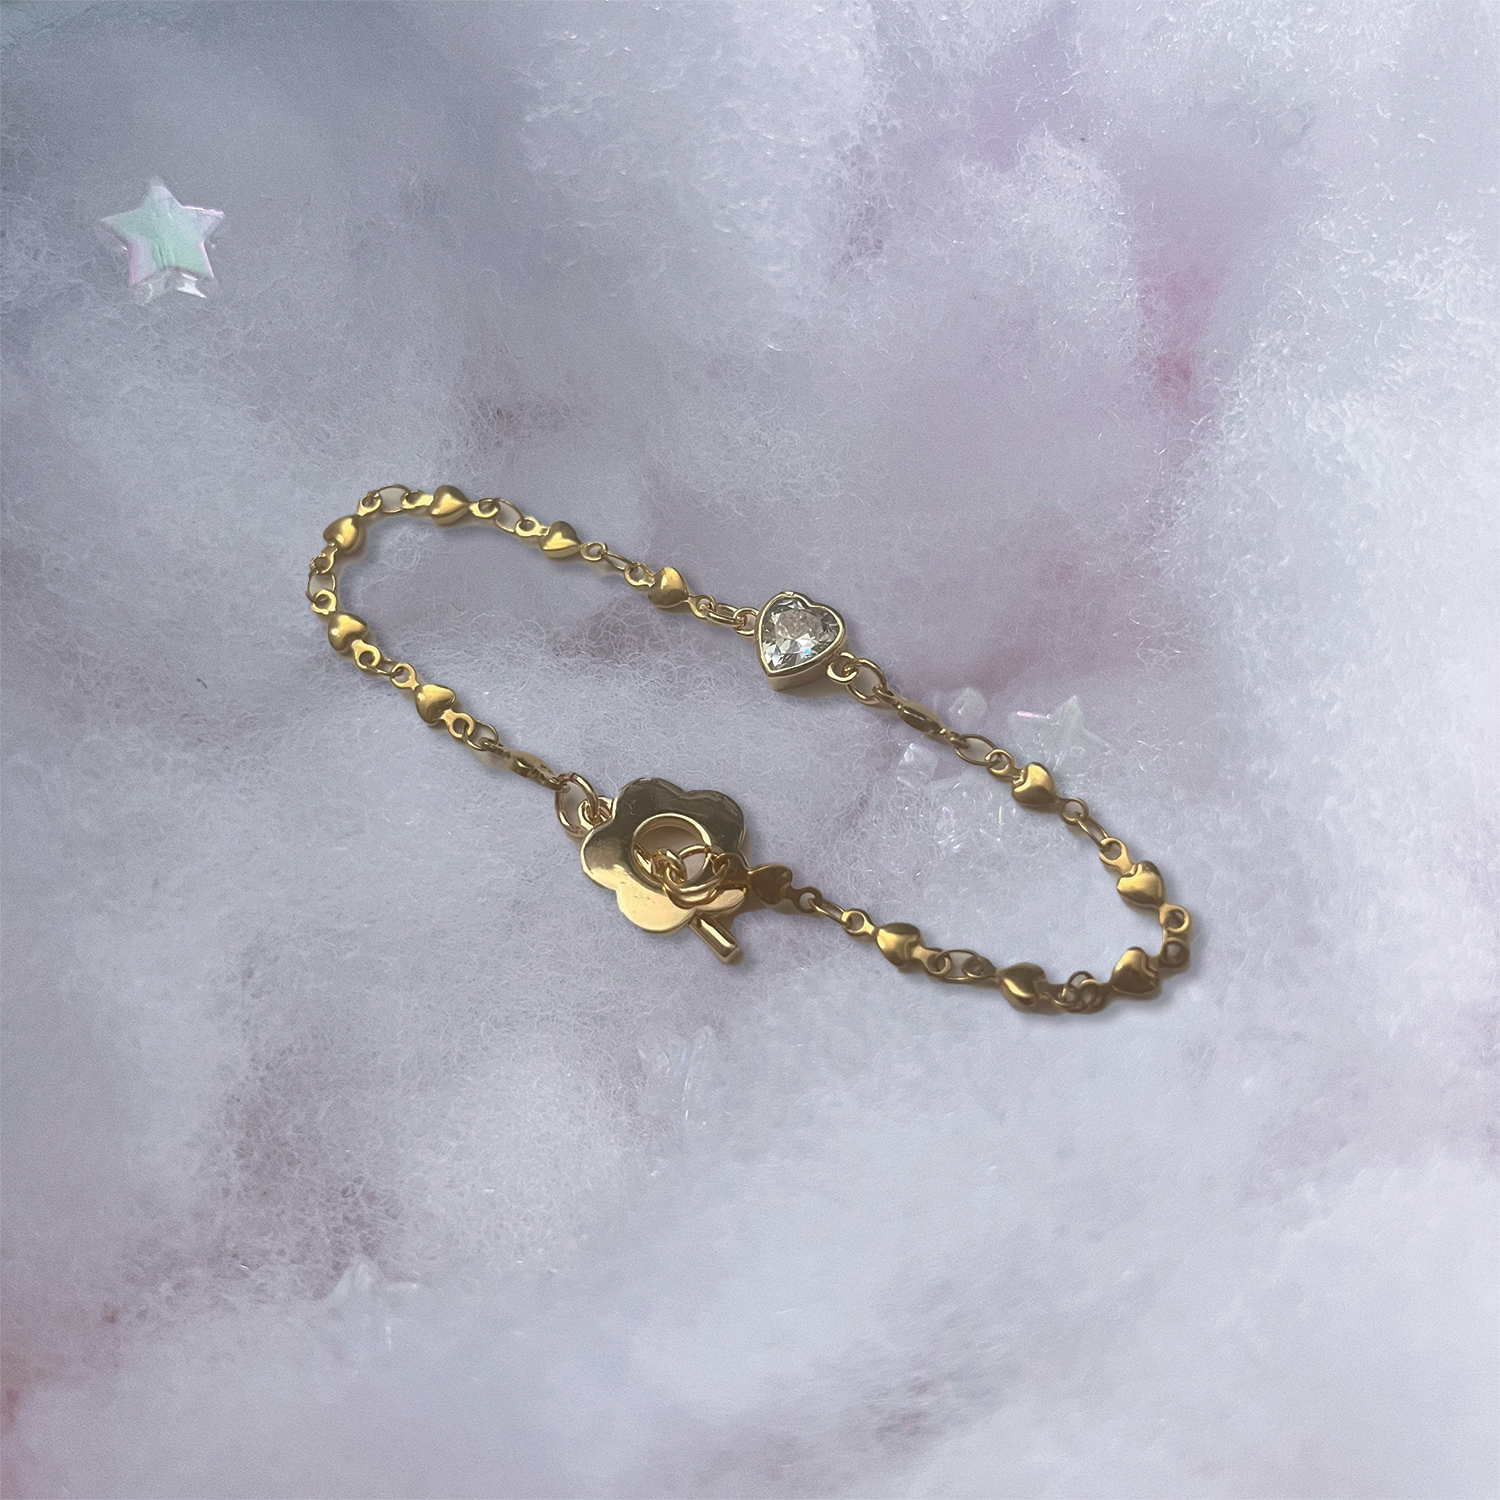 Dainty Soft Lover Bracelet in Gold neatly arranged as a product photo. Bracelet features details of gold heart links, a dainty heart crystal connecting charm, and daisy-style clasp.